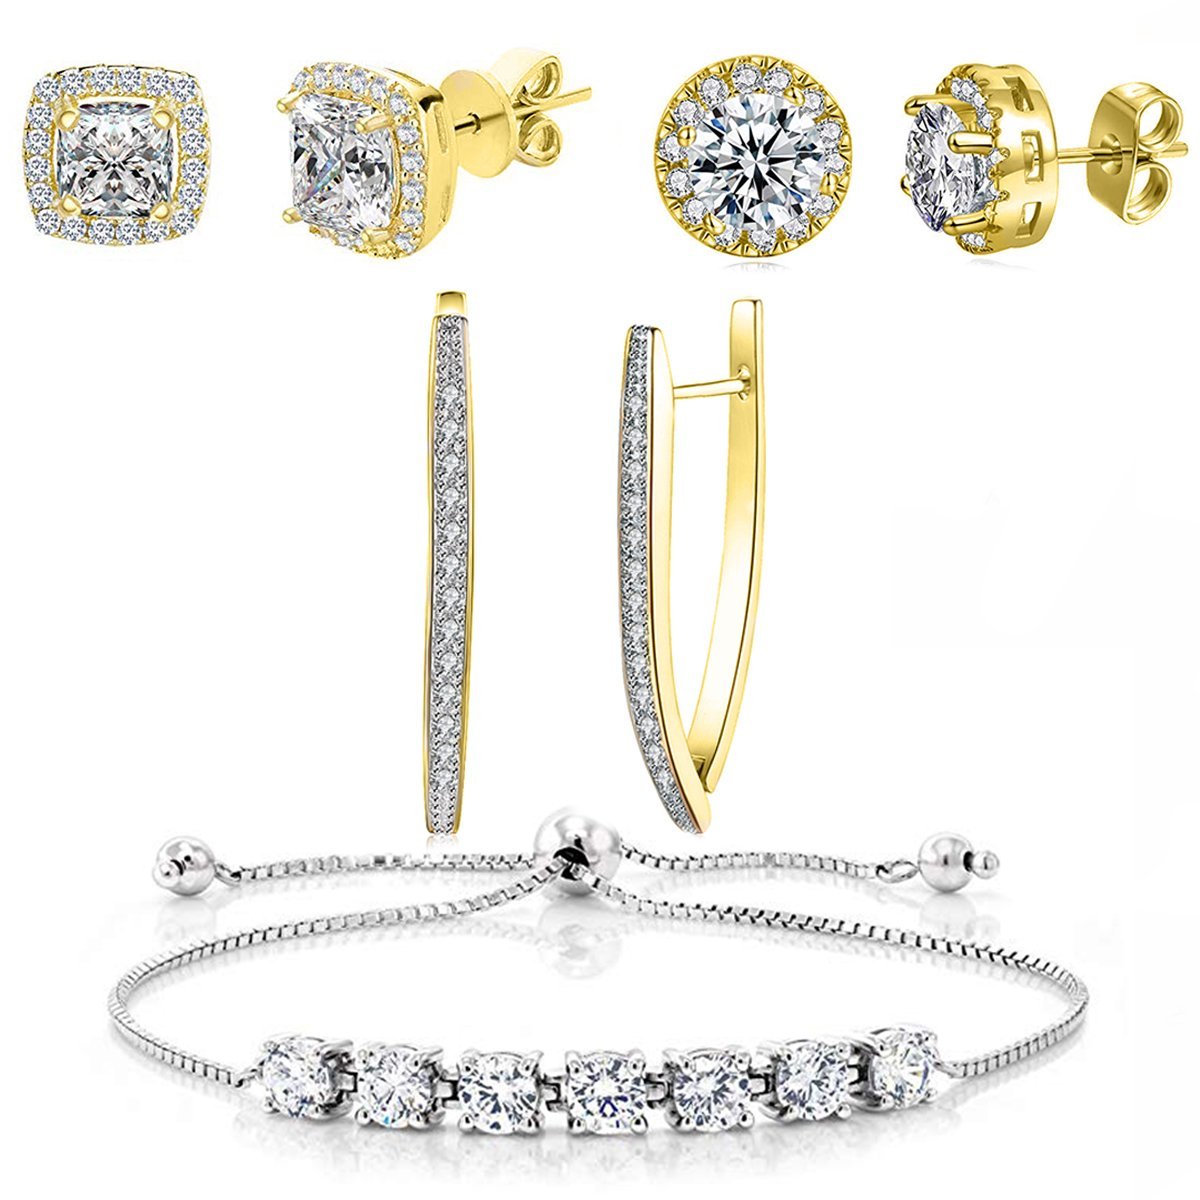 Picture of Alily Jewelry AustrianBUNDLE-GOLD-GBOX Halo Earrings Hoop & Bracelet Set with Gift Box&#44; Gold - 4 Piece